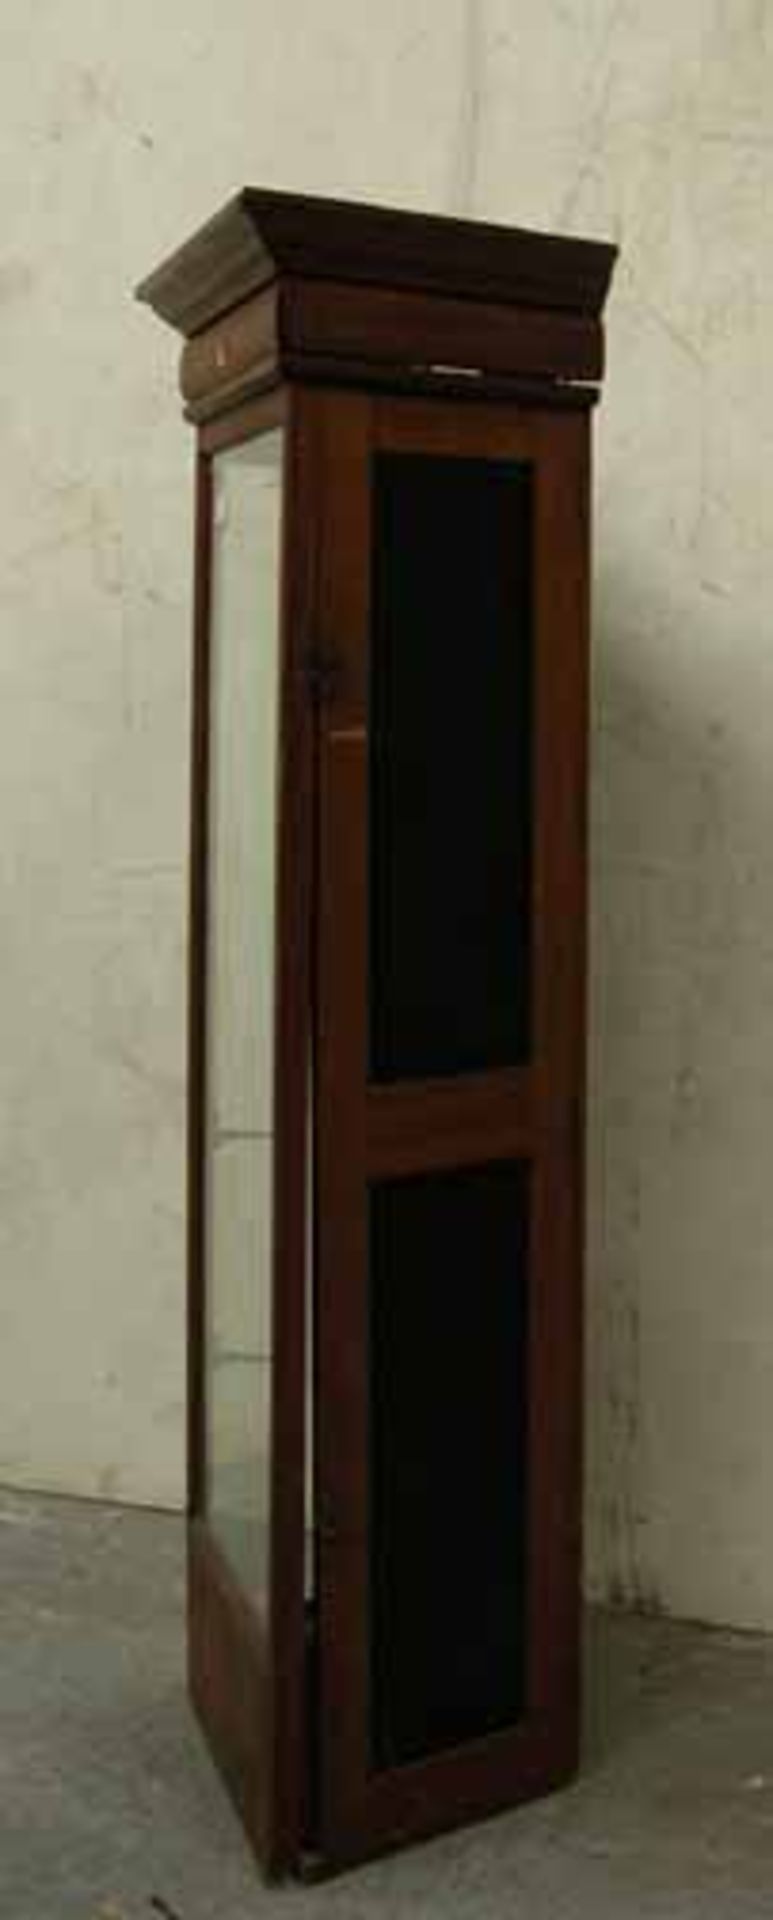 *ANTIQUE FLOOR STANDING MAHOGANY GLAZED SHOP CABINET, VICTORIAN. HEIGHT 1585MM (62.5IN) X WIDTH - Image 2 of 7